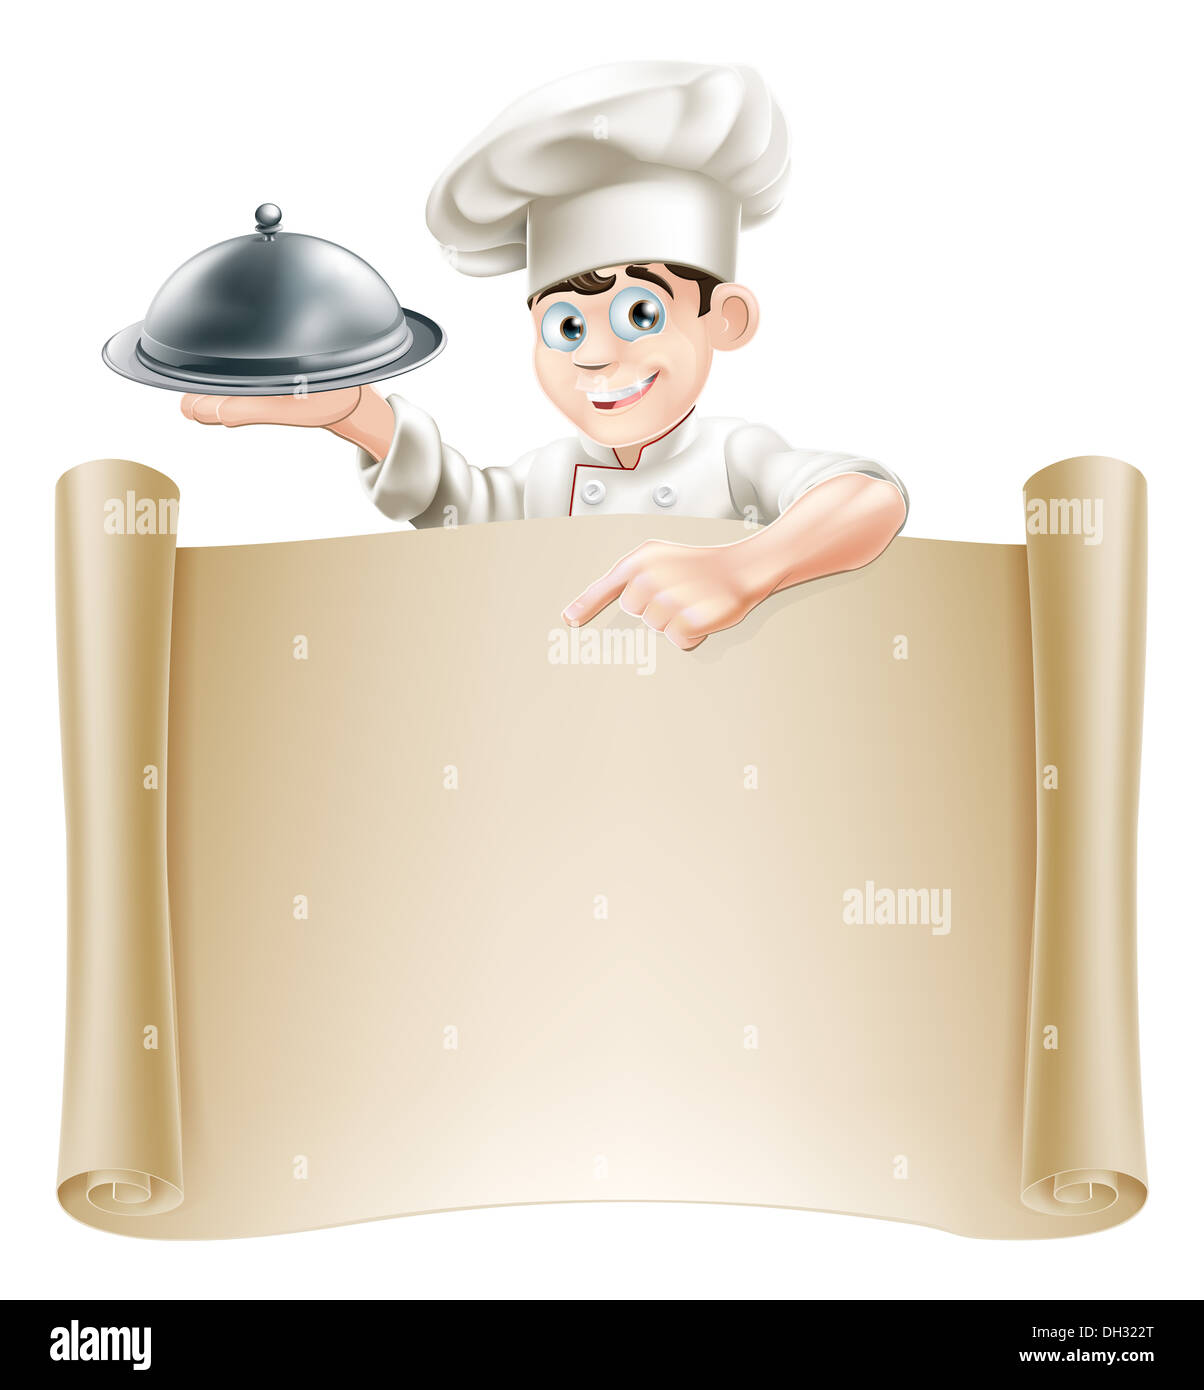 Drawing of a chef holding a silver platter or cloche pointing at a paper scroll or menu Stock Photo